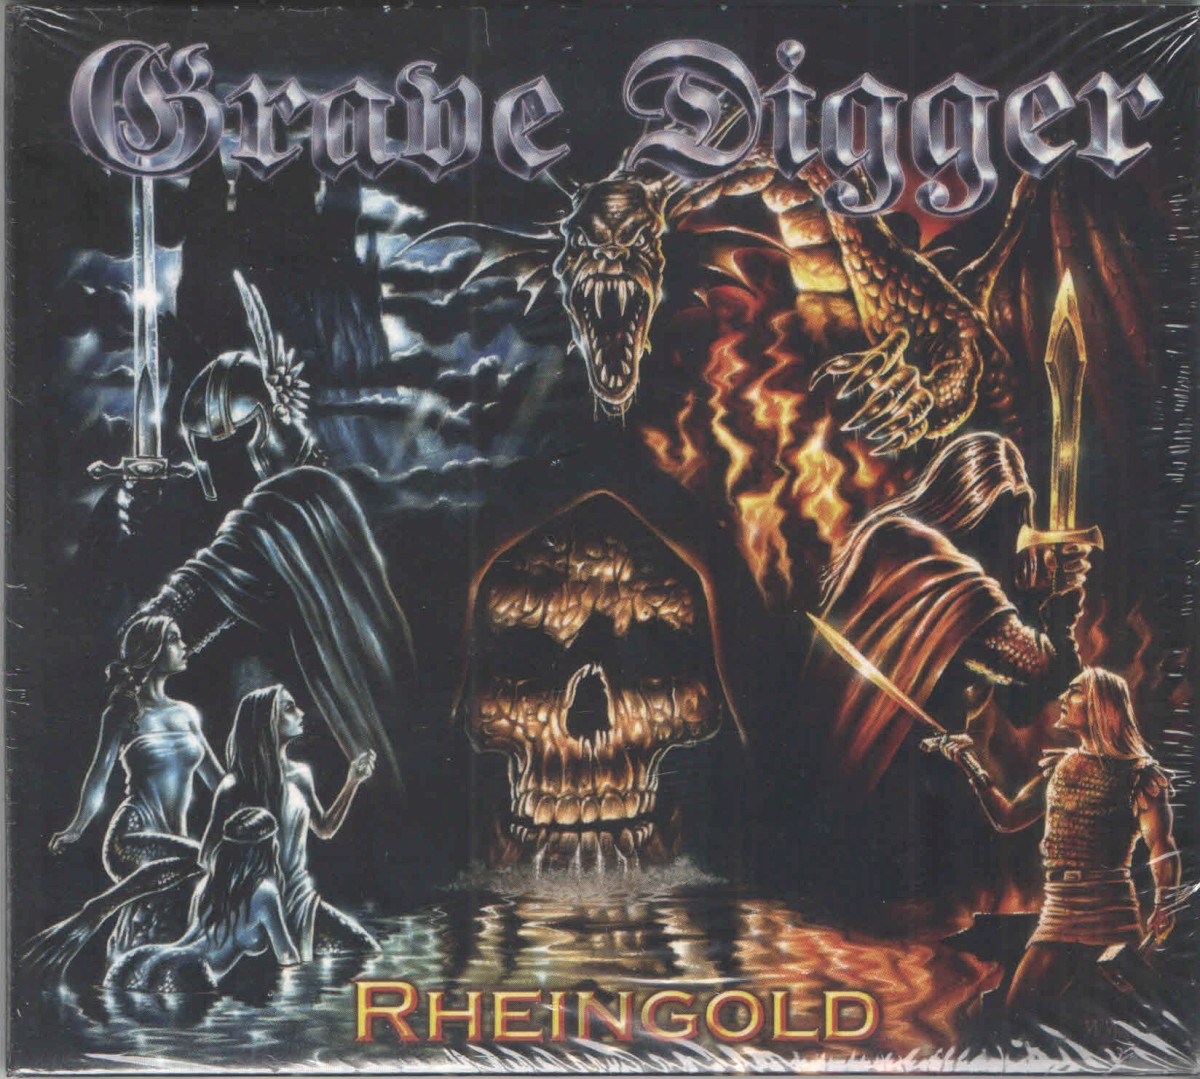 Release “Rheingold” by Grave Digger - Cover Art - MusicBrainz